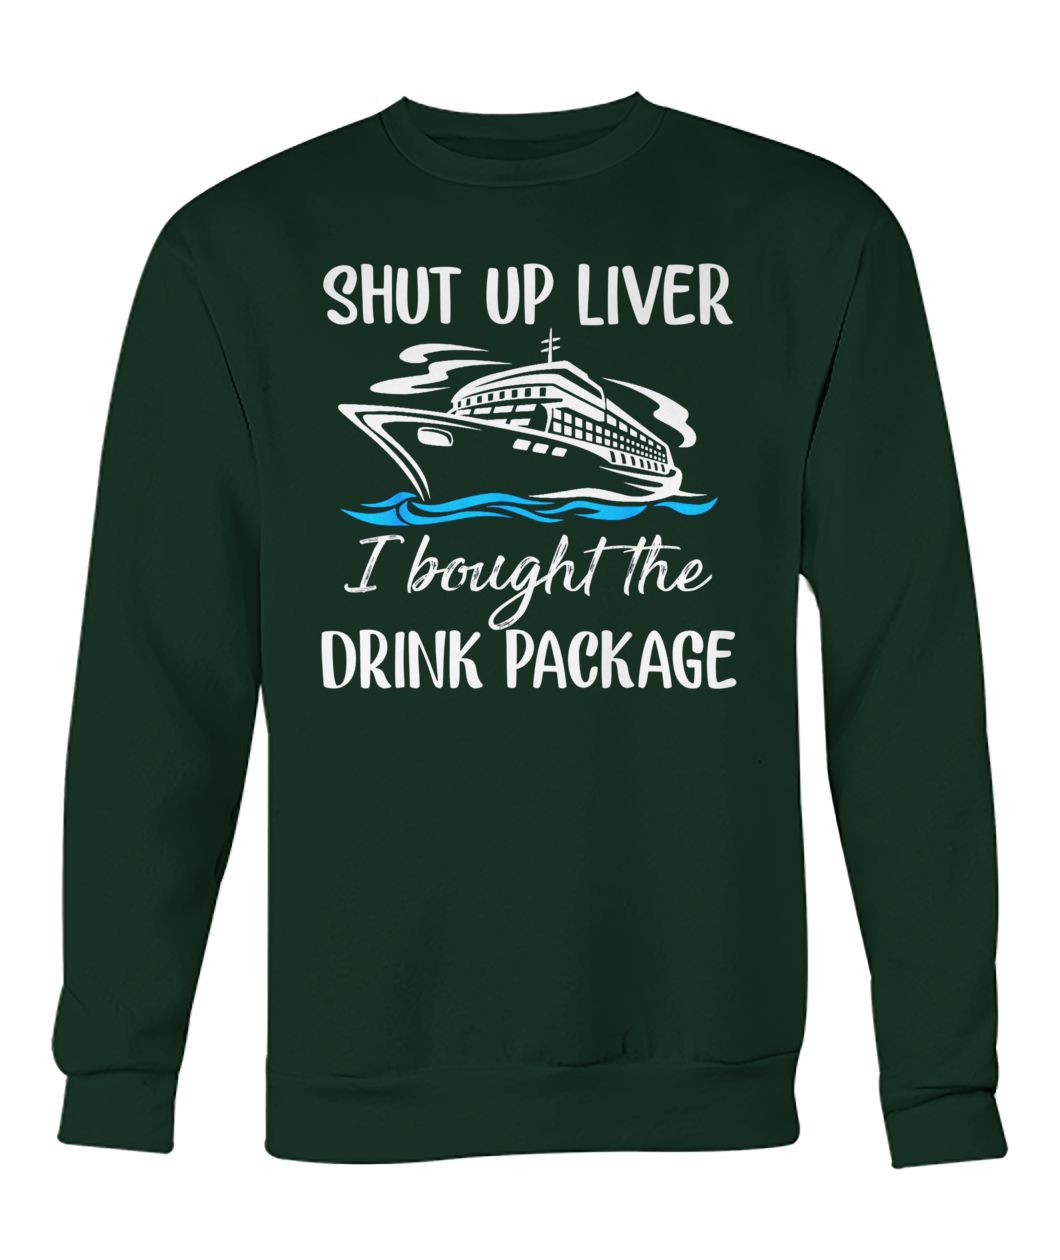 Cruise shut up liver I bought the drink package crew neck sweatshirt